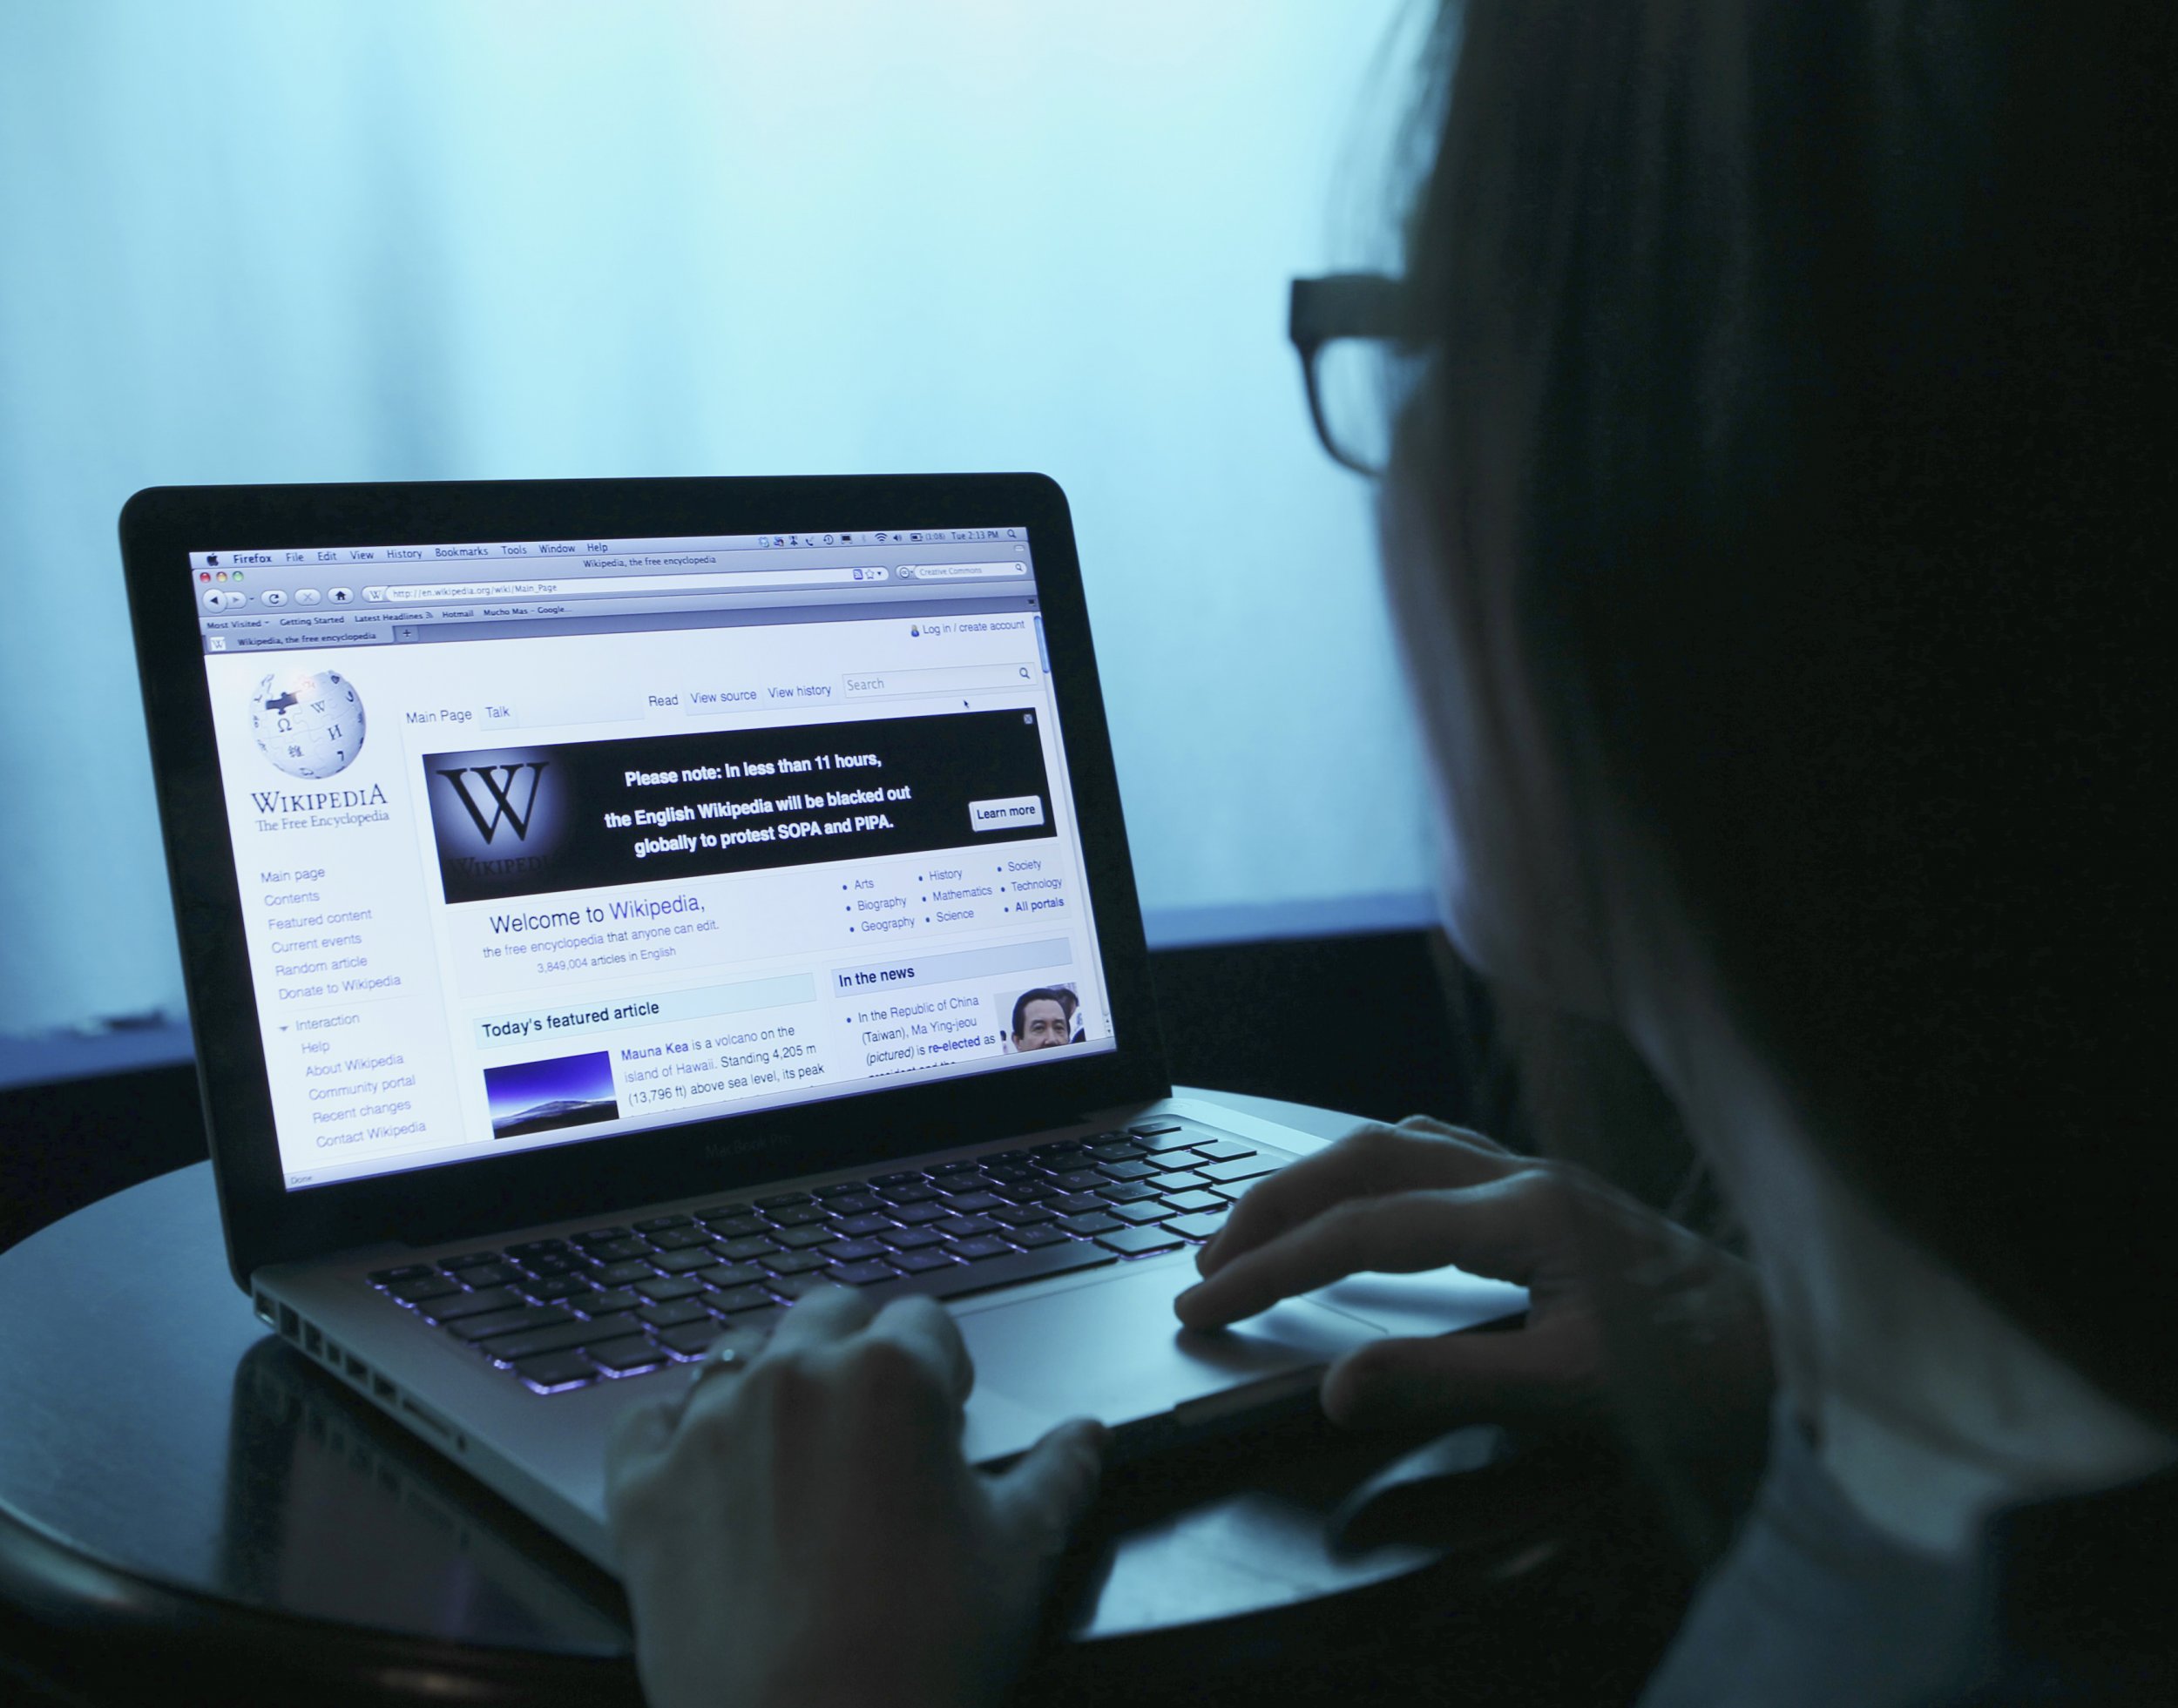 A woman opens Wikipedia on her laptop